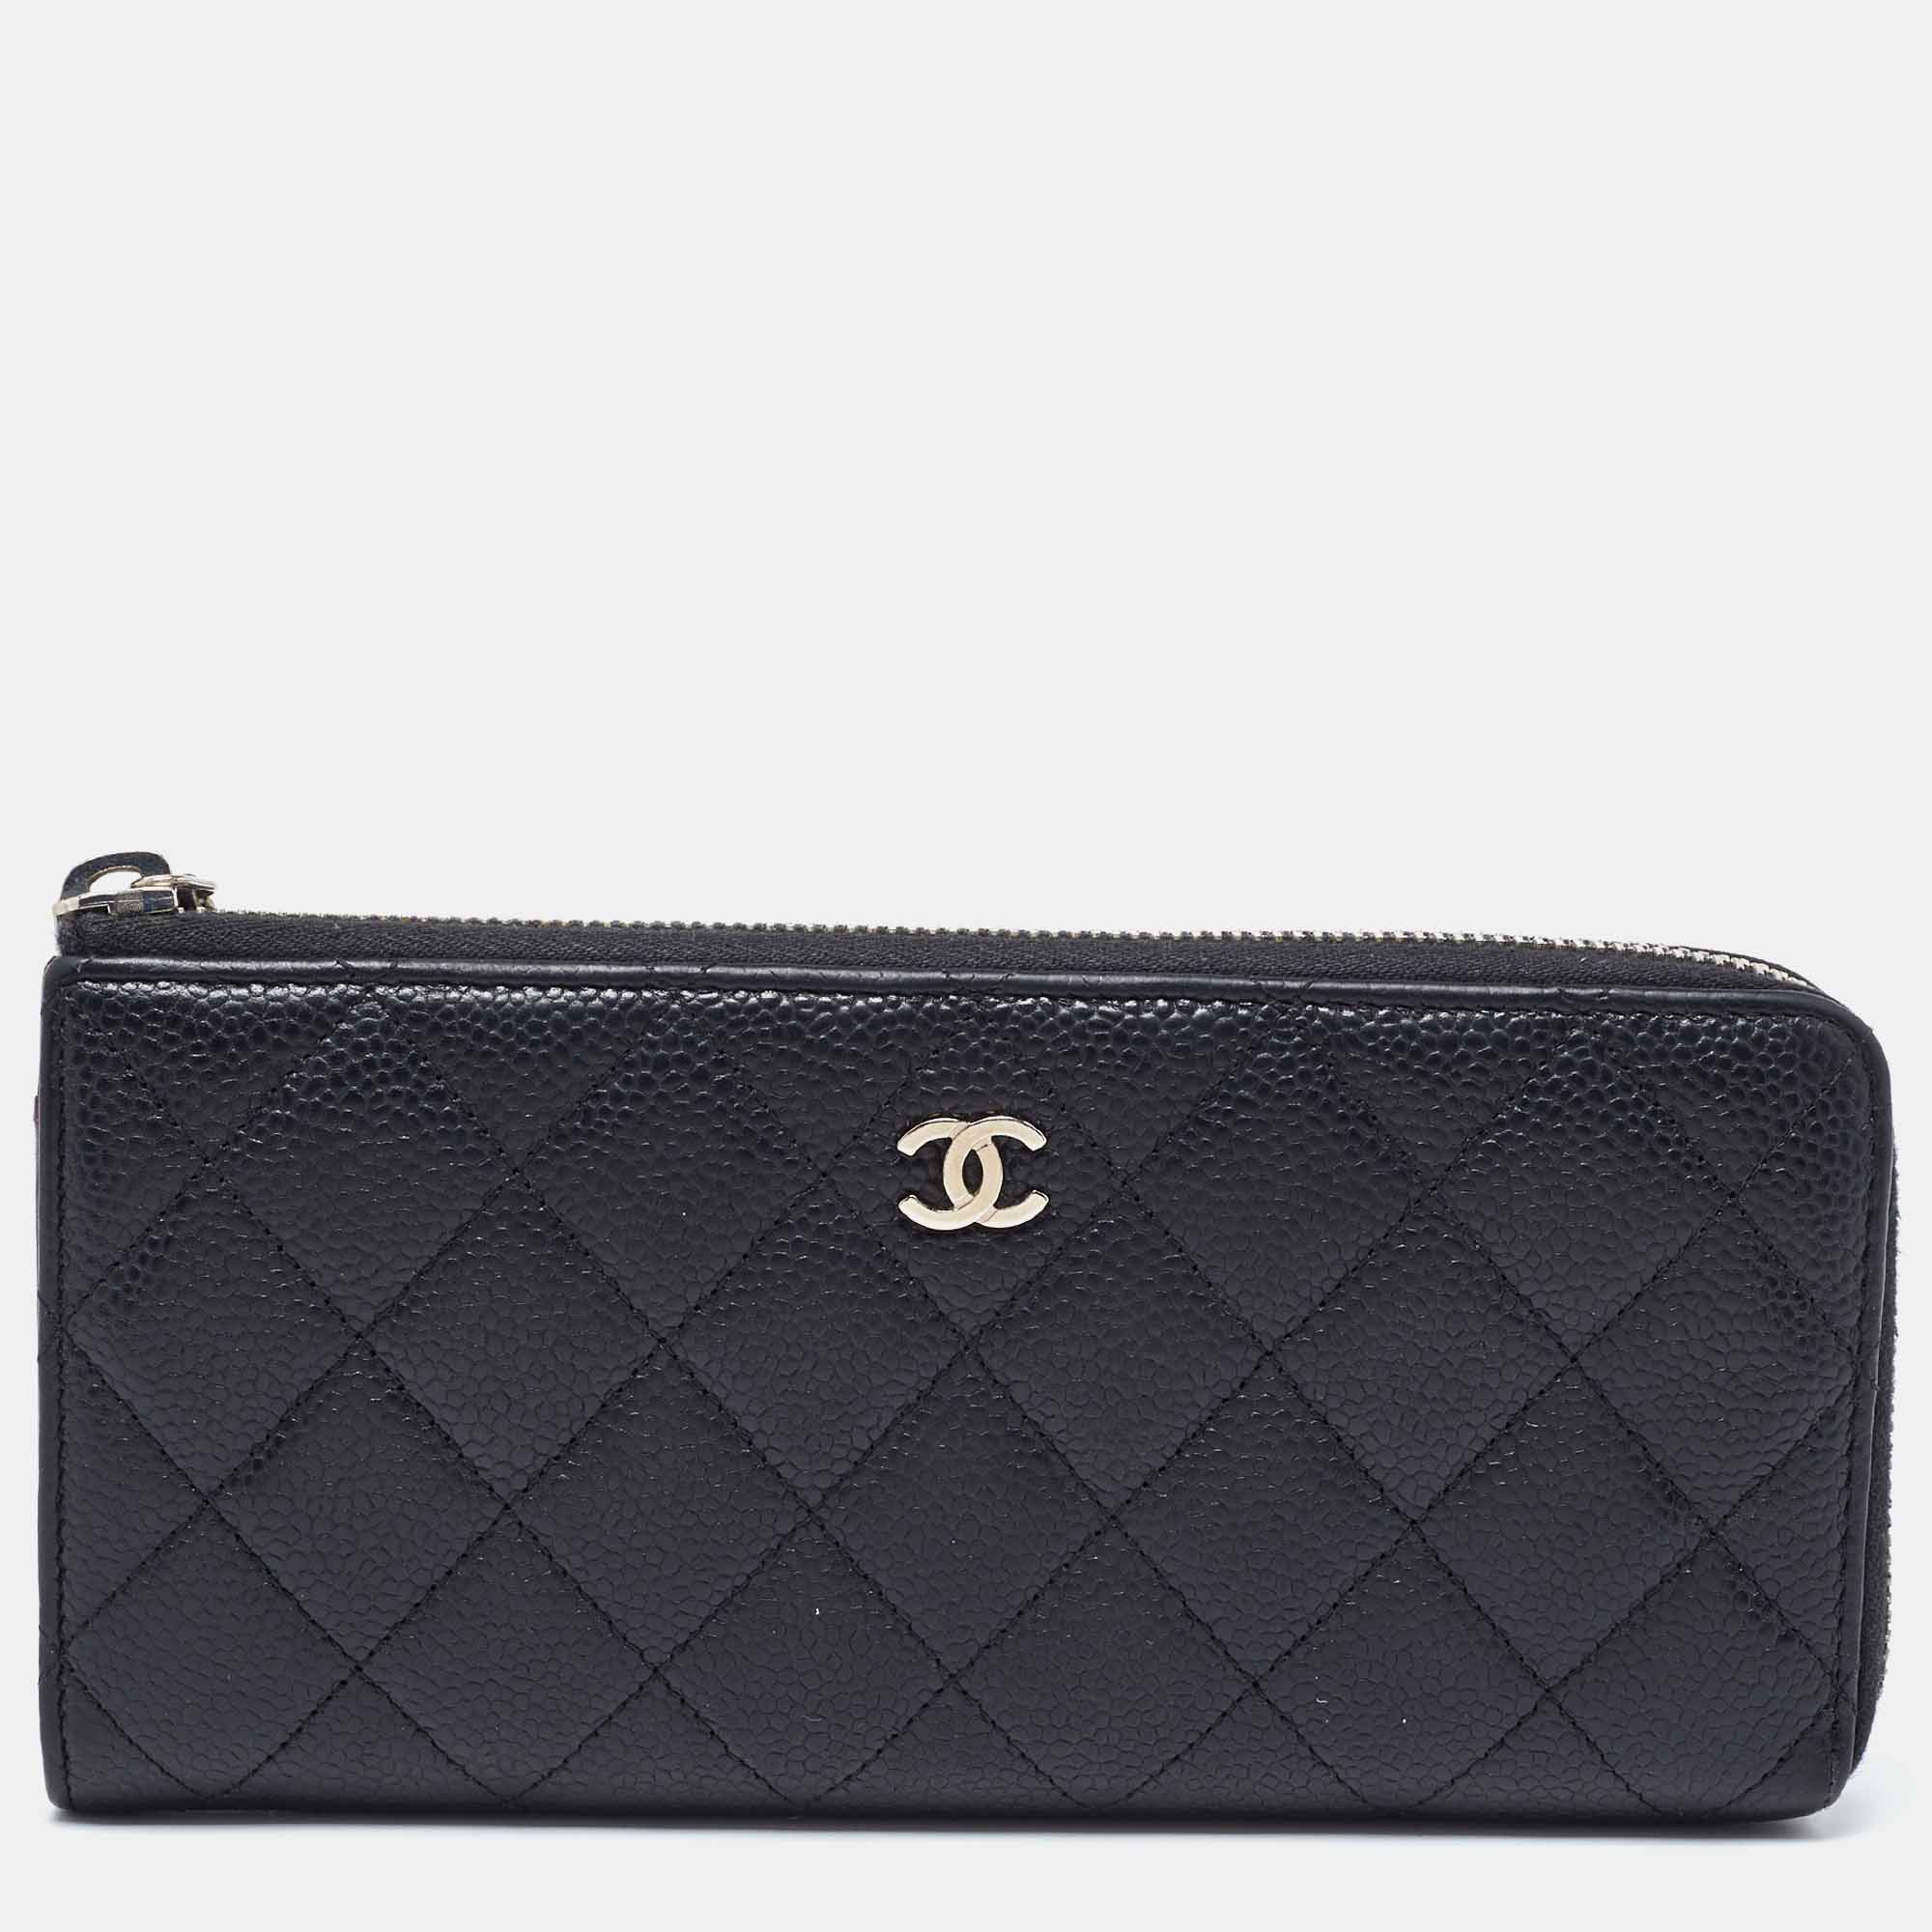 Pre-owned Chanel Black Quilted Caviar Leather Zip Around Wallet